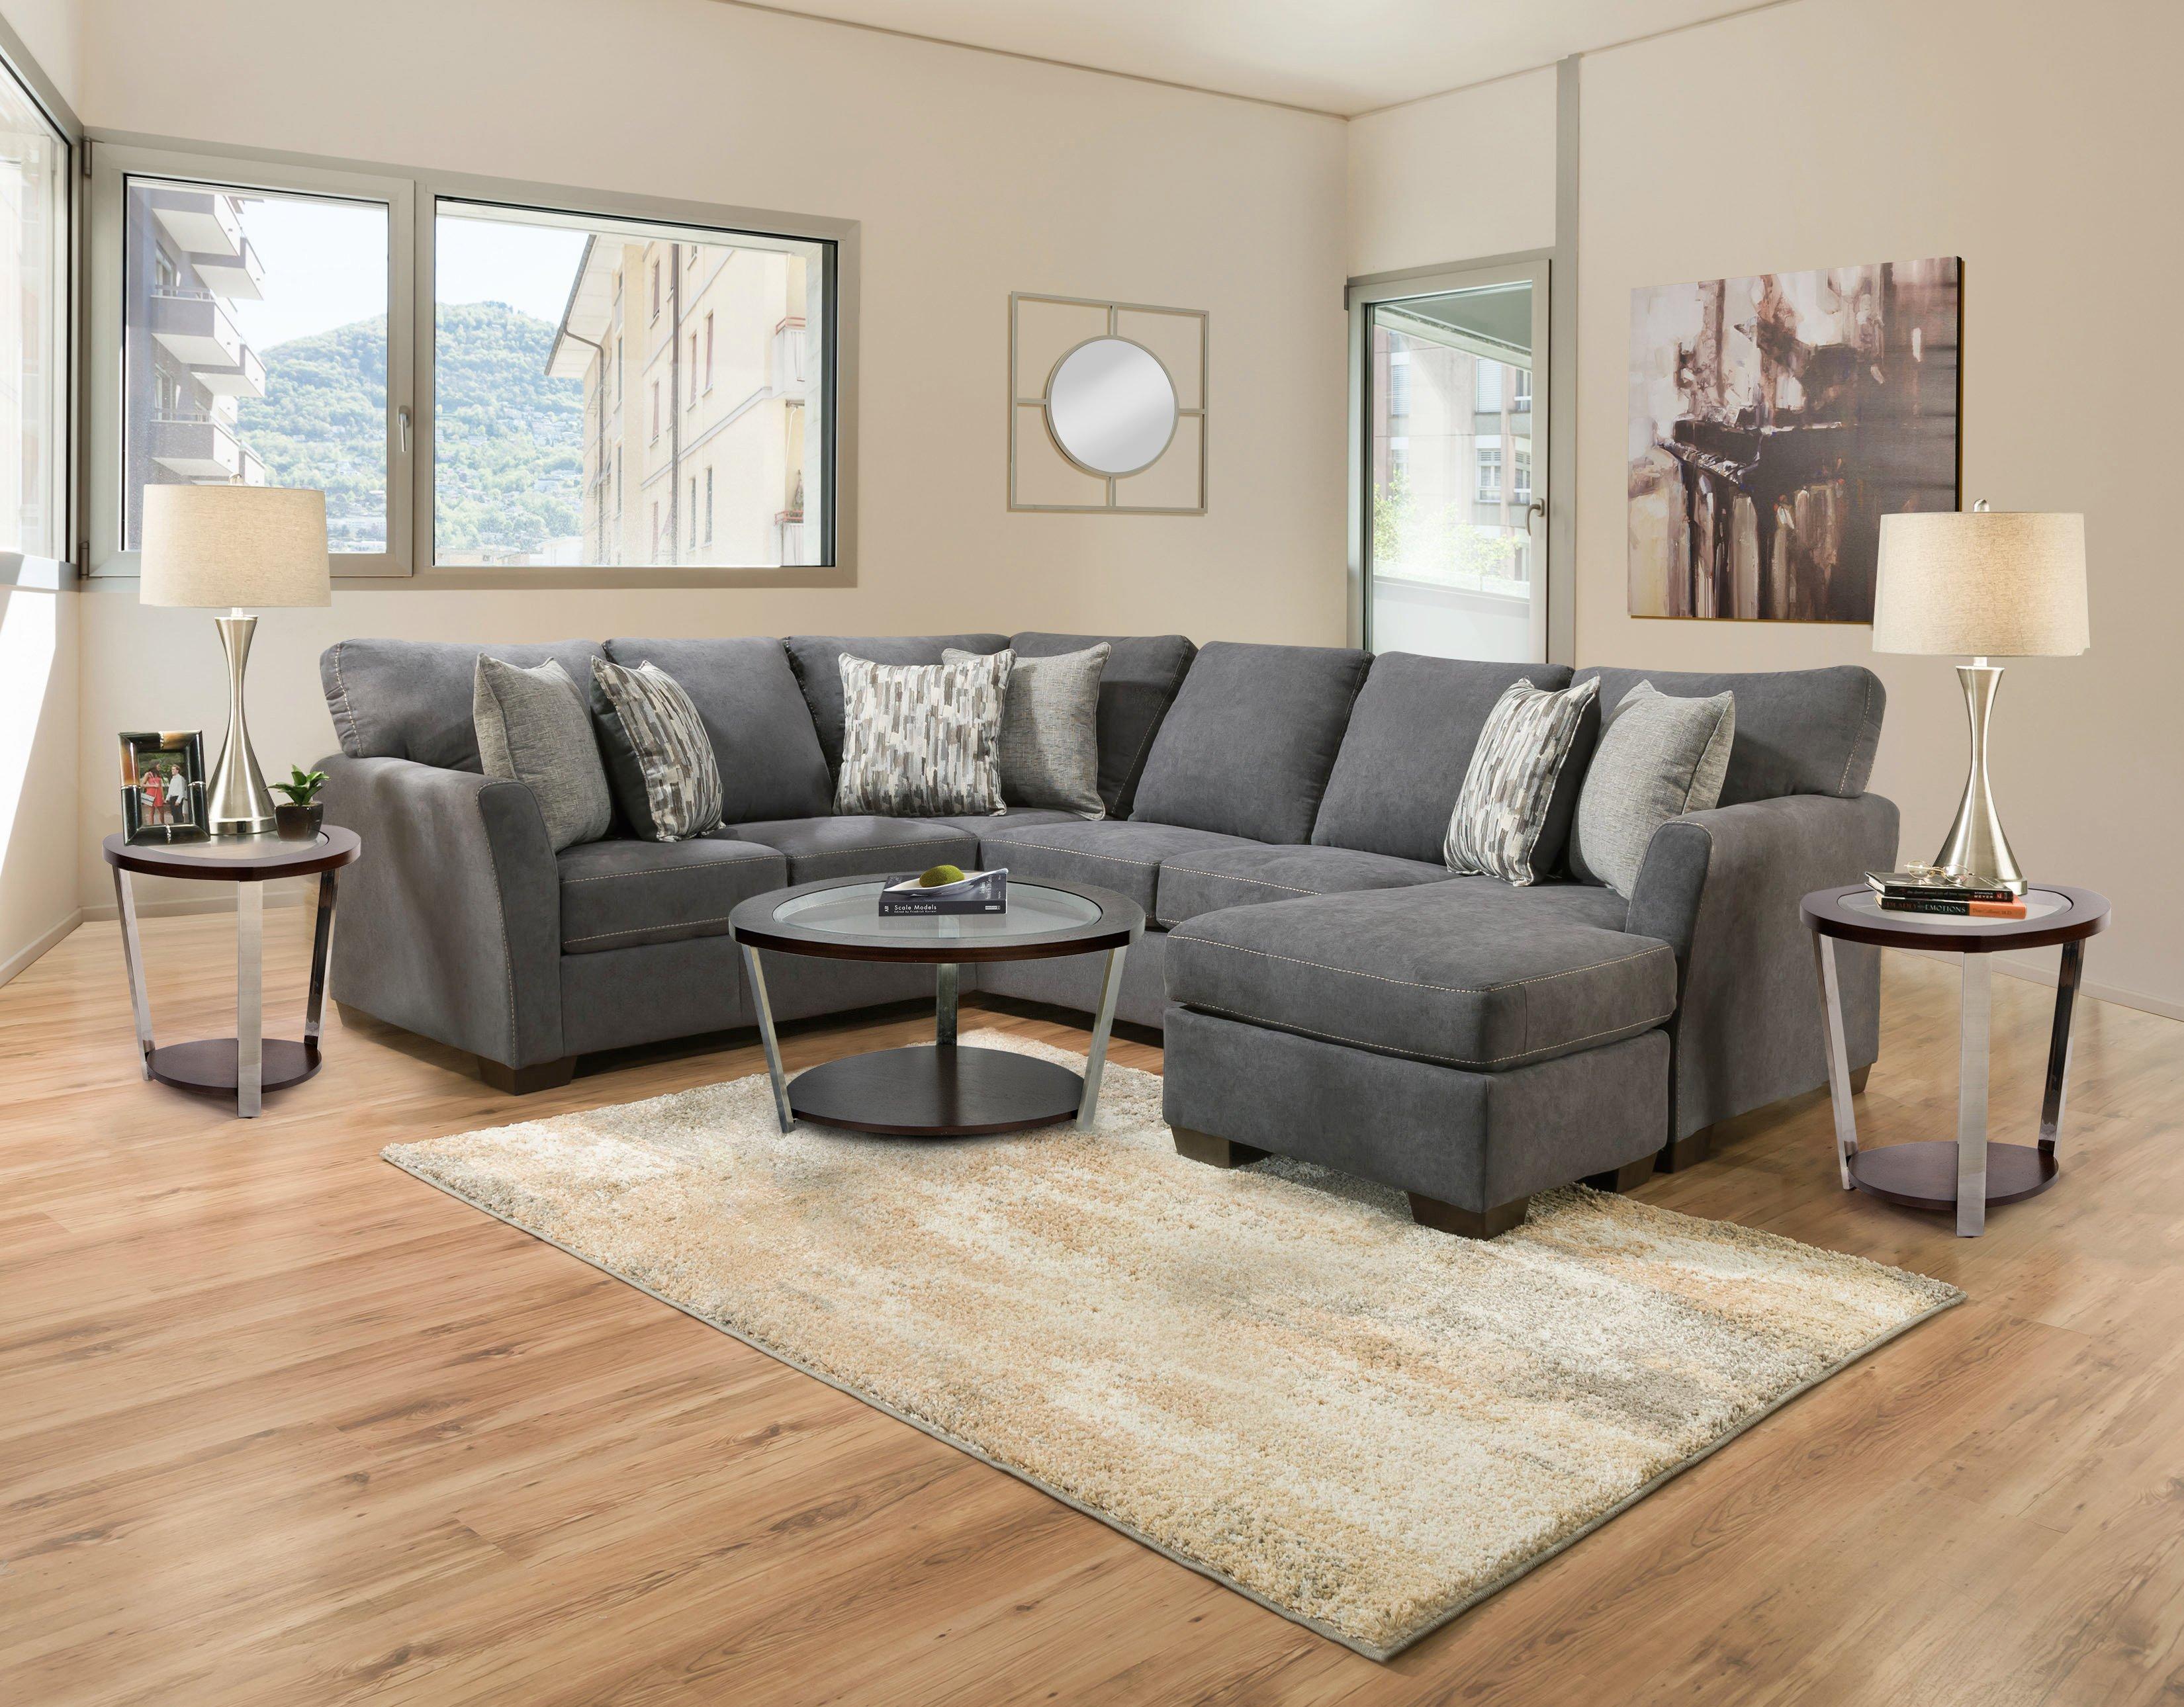 American Freight 7 Piece Living Room Set